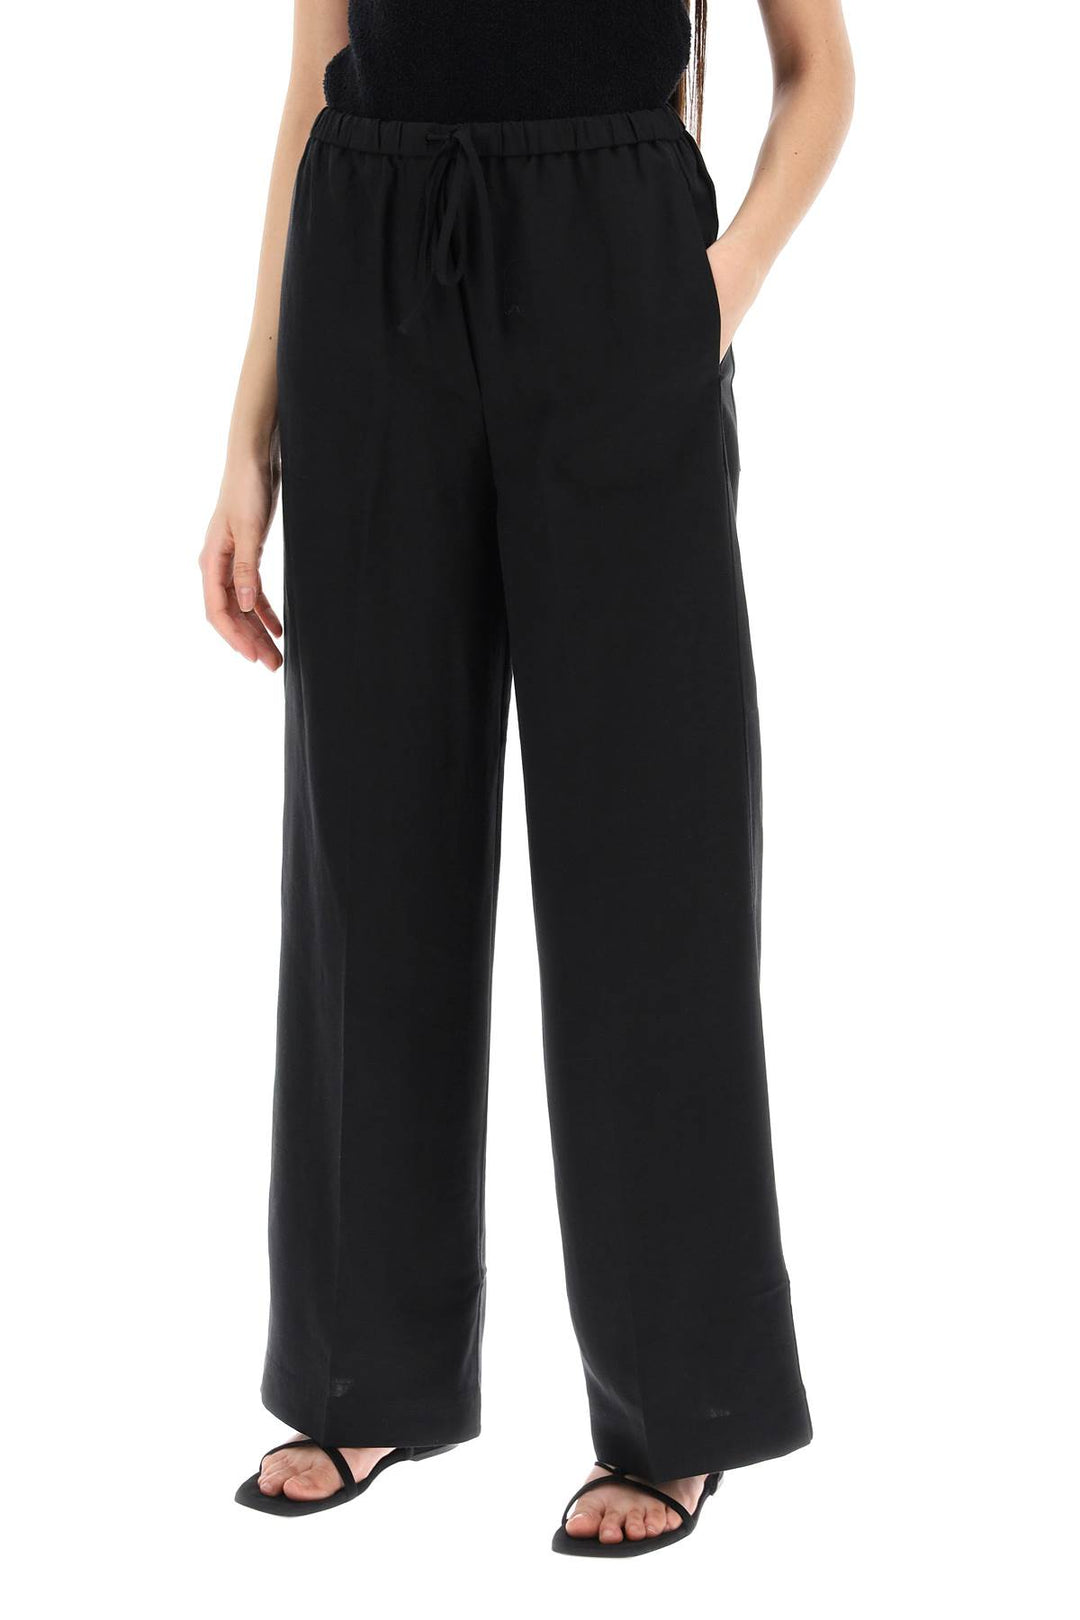 Toteme Lightweight Linen And Viscose Trousers   Black